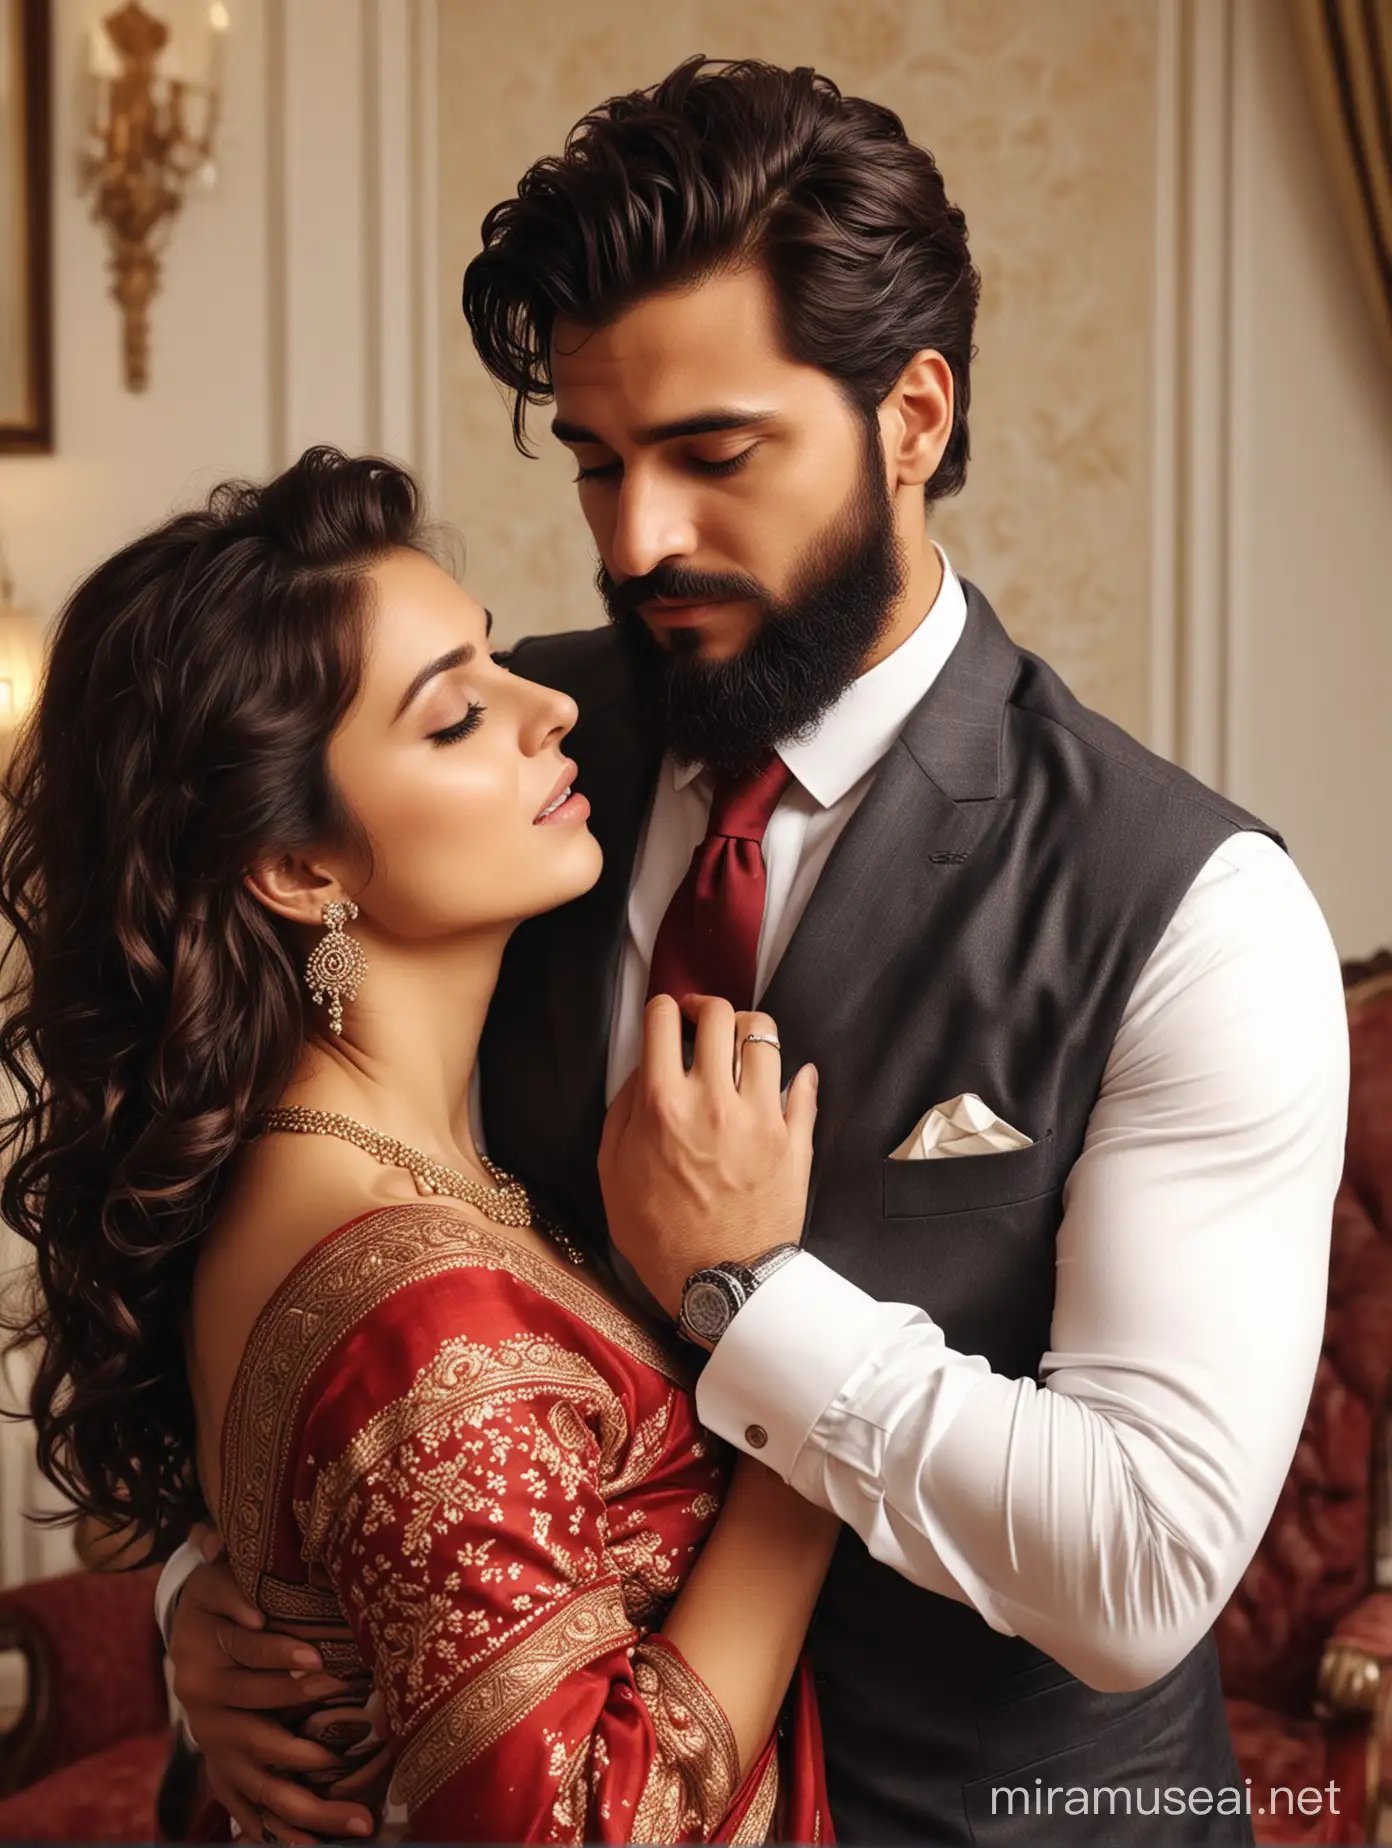 full body view  of most beautiful european couple as most beautiful indian couple, most beautiful girl in elegant bold color saree, long curly hairs, hairs tied  up with hair style stylishly, necklace,   big wide black  eyes, full face, perfect red dot, makeup, low cut neck, sleeveless, beautiful symmetric low cut back, girl embracing with emotion and possessive feeling, pressing face to chest of man, emotional crying with longing feeling, innocence and ecstasy, hands around man neck, man comforting her,  man with stylish beard, perfect trim  hair cut, formals and tie, perfect limbs and fingers, photo realistic, 4k.
background, spacious modern elite photo room, with luxury sofa set, cream color carpet, elegant interior designs, vintage lamps, romantic reunion ambience, photorealistic, vibrant colors, intricate details, 8k.